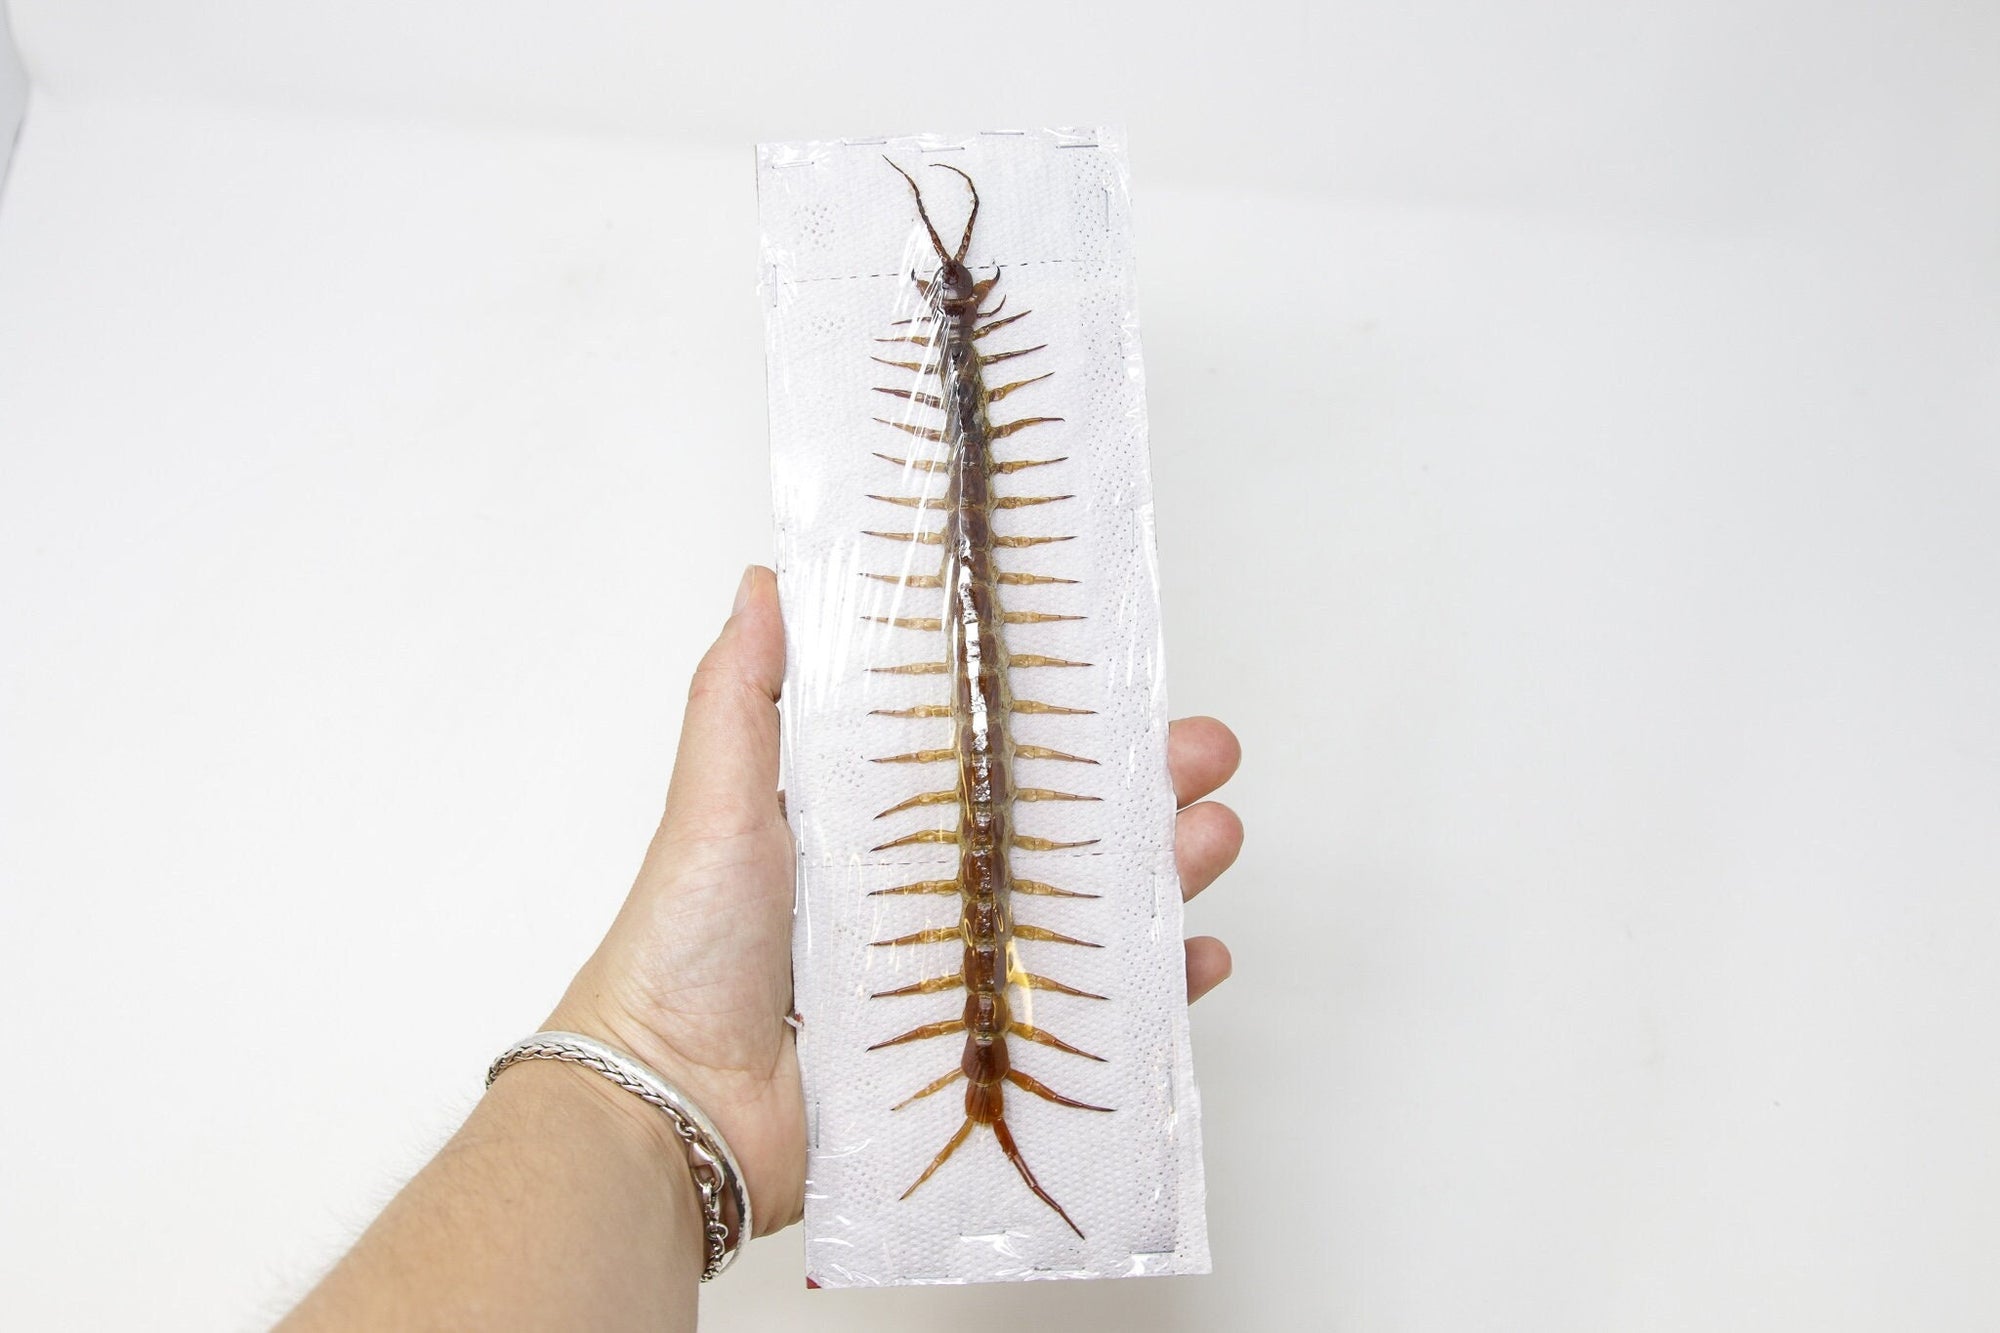 Giant Centipede (Scolopendra subspinipes) Thailand (Grade A-/A2) Large 8 Inches +